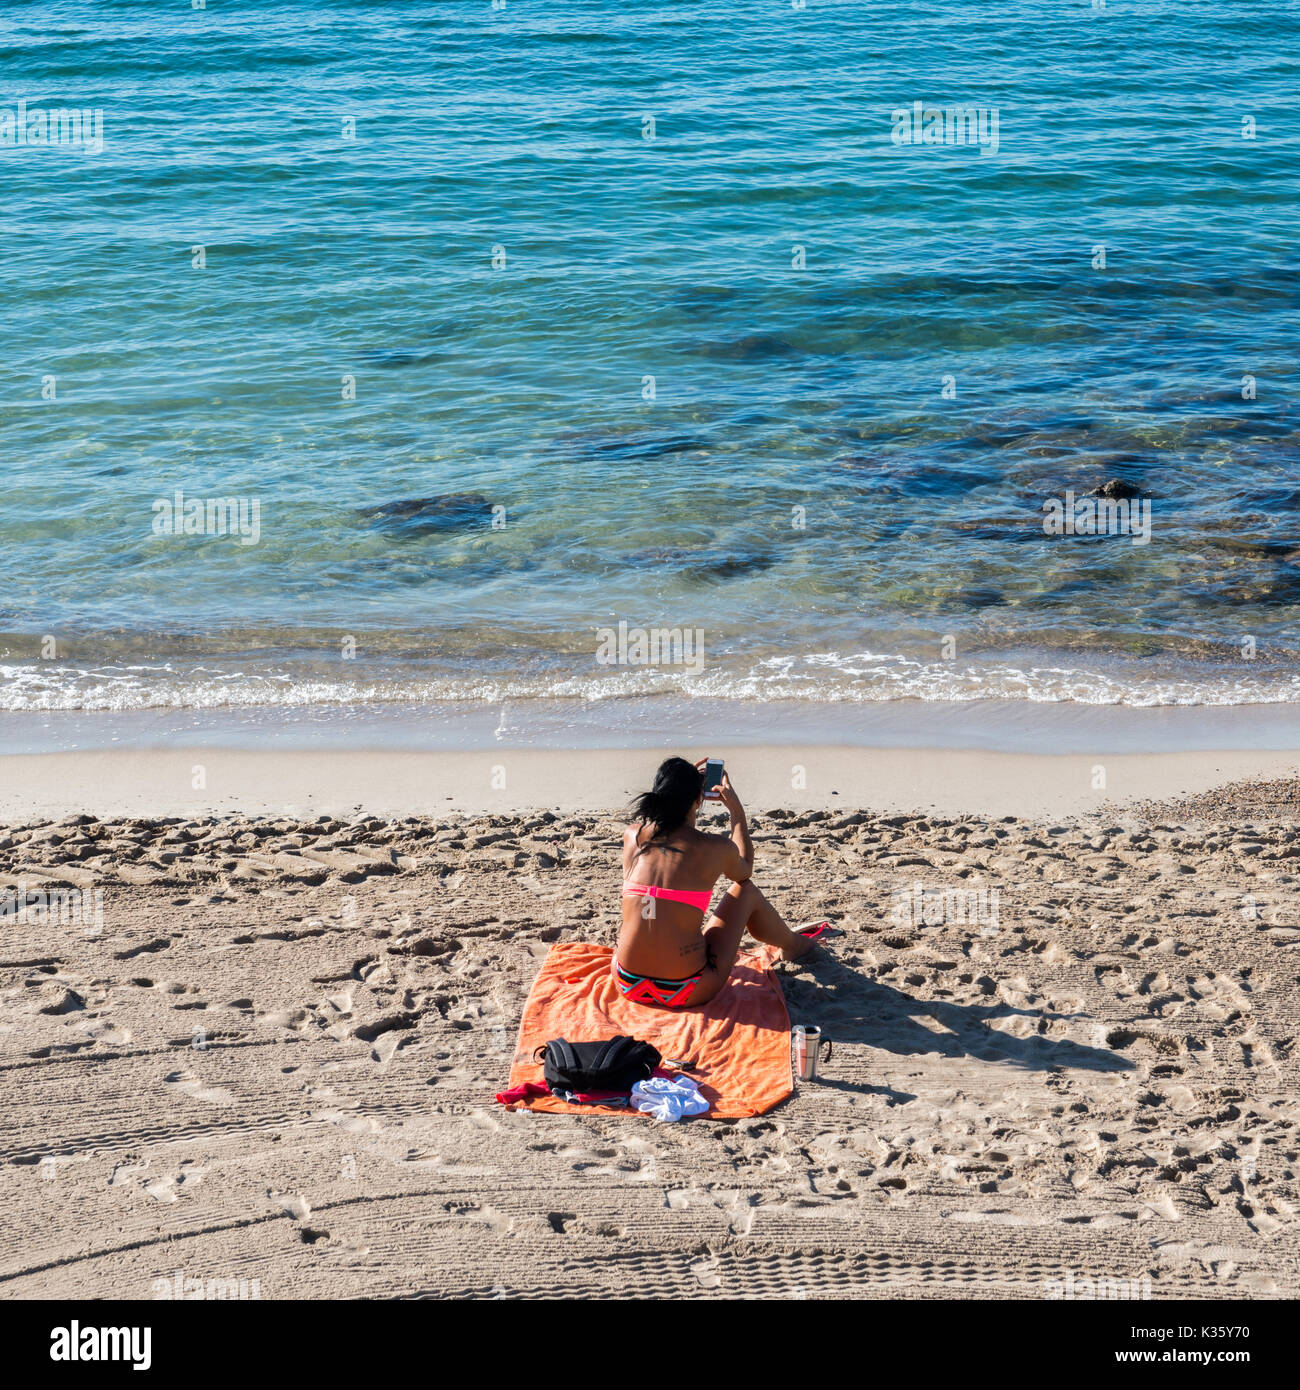 A woman on her smartphone on a beach in Nice, Cote d'Azur, France Stock Photo